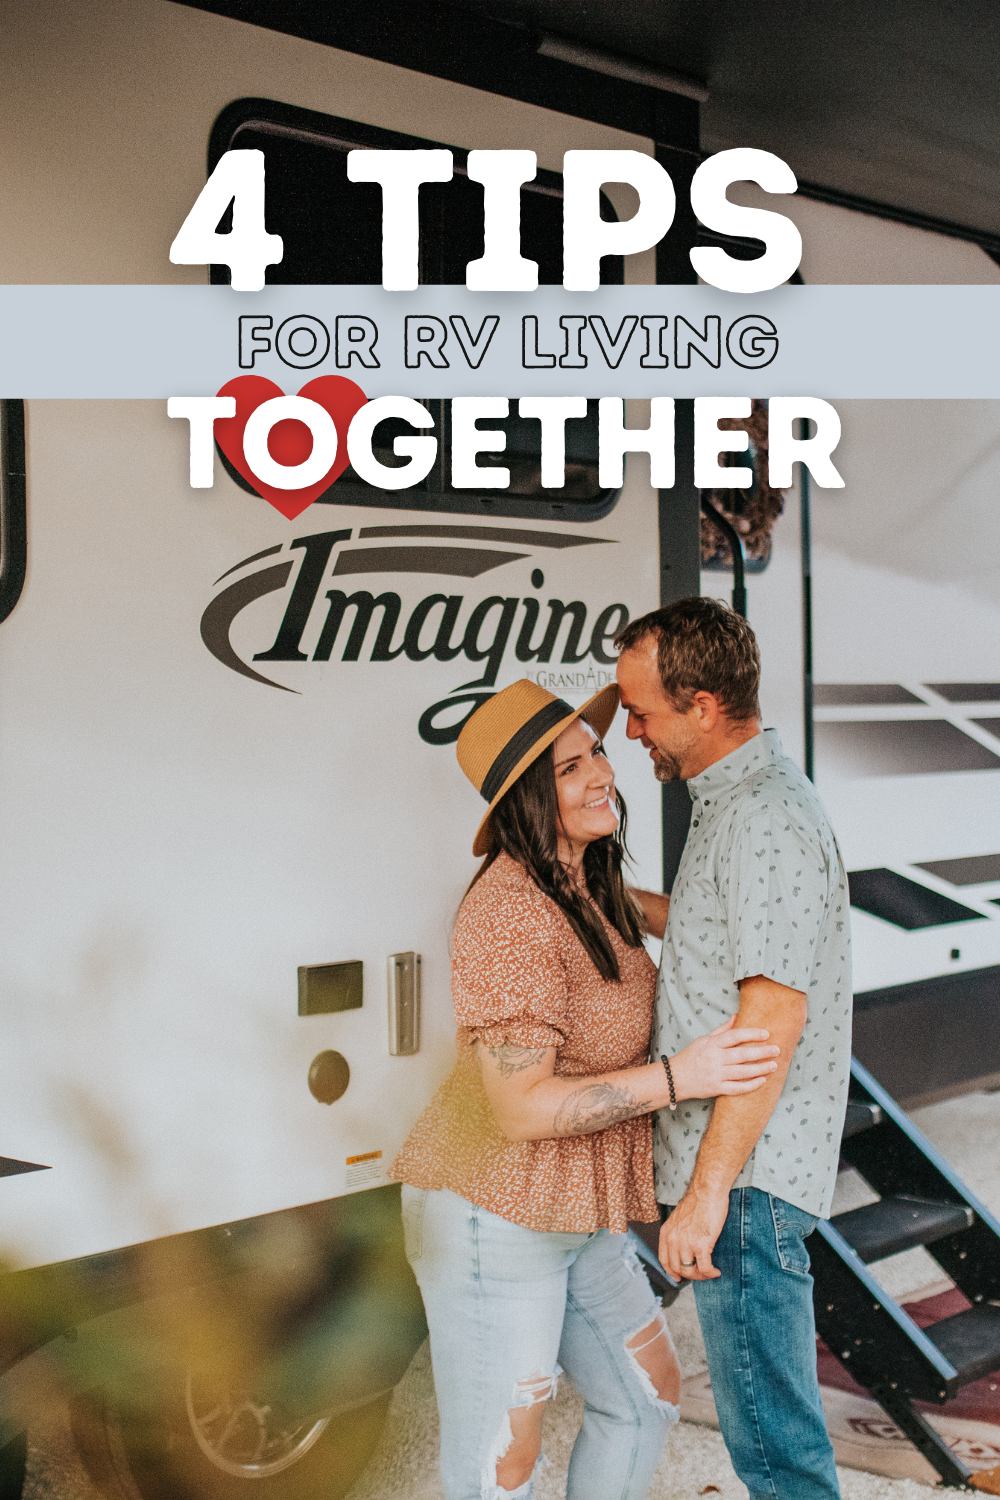 4 Essential Steps to Survive + Thrive Full-Time RV Living Together